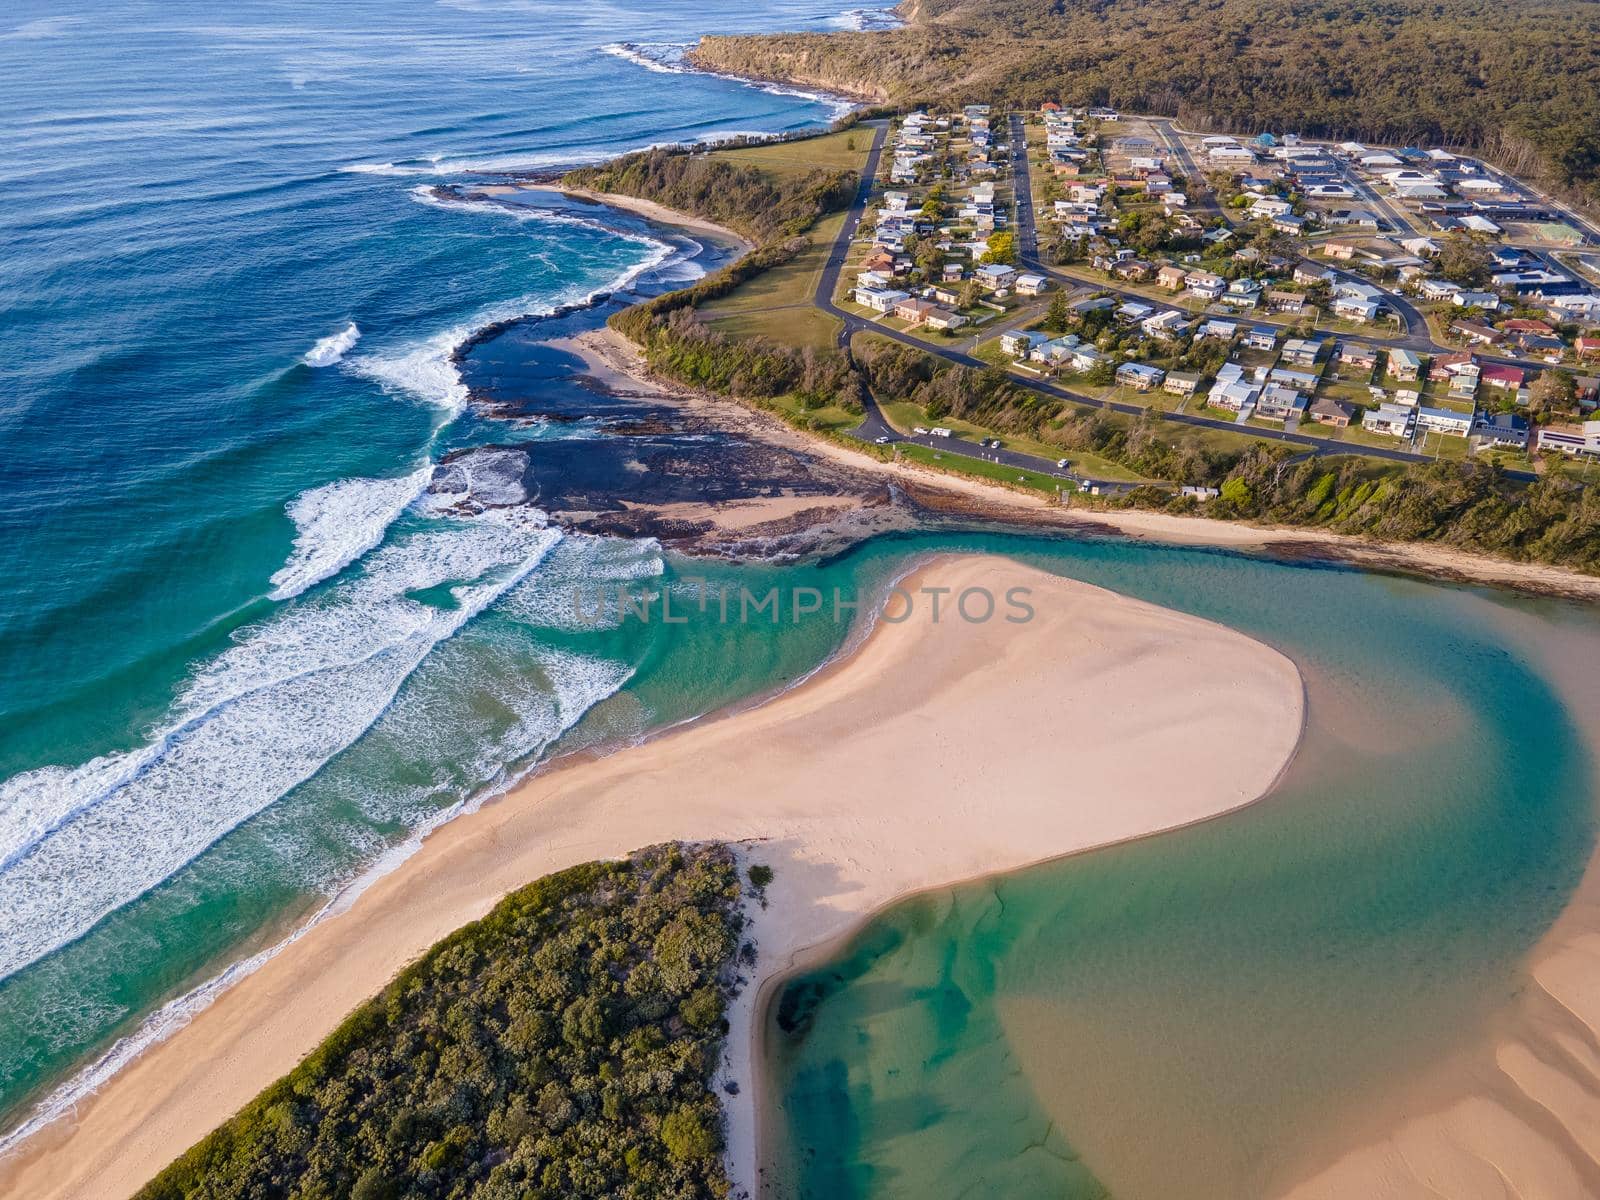 Dolphin Point Inlet at Burrill Lake, NSW, Australia. High quality photo